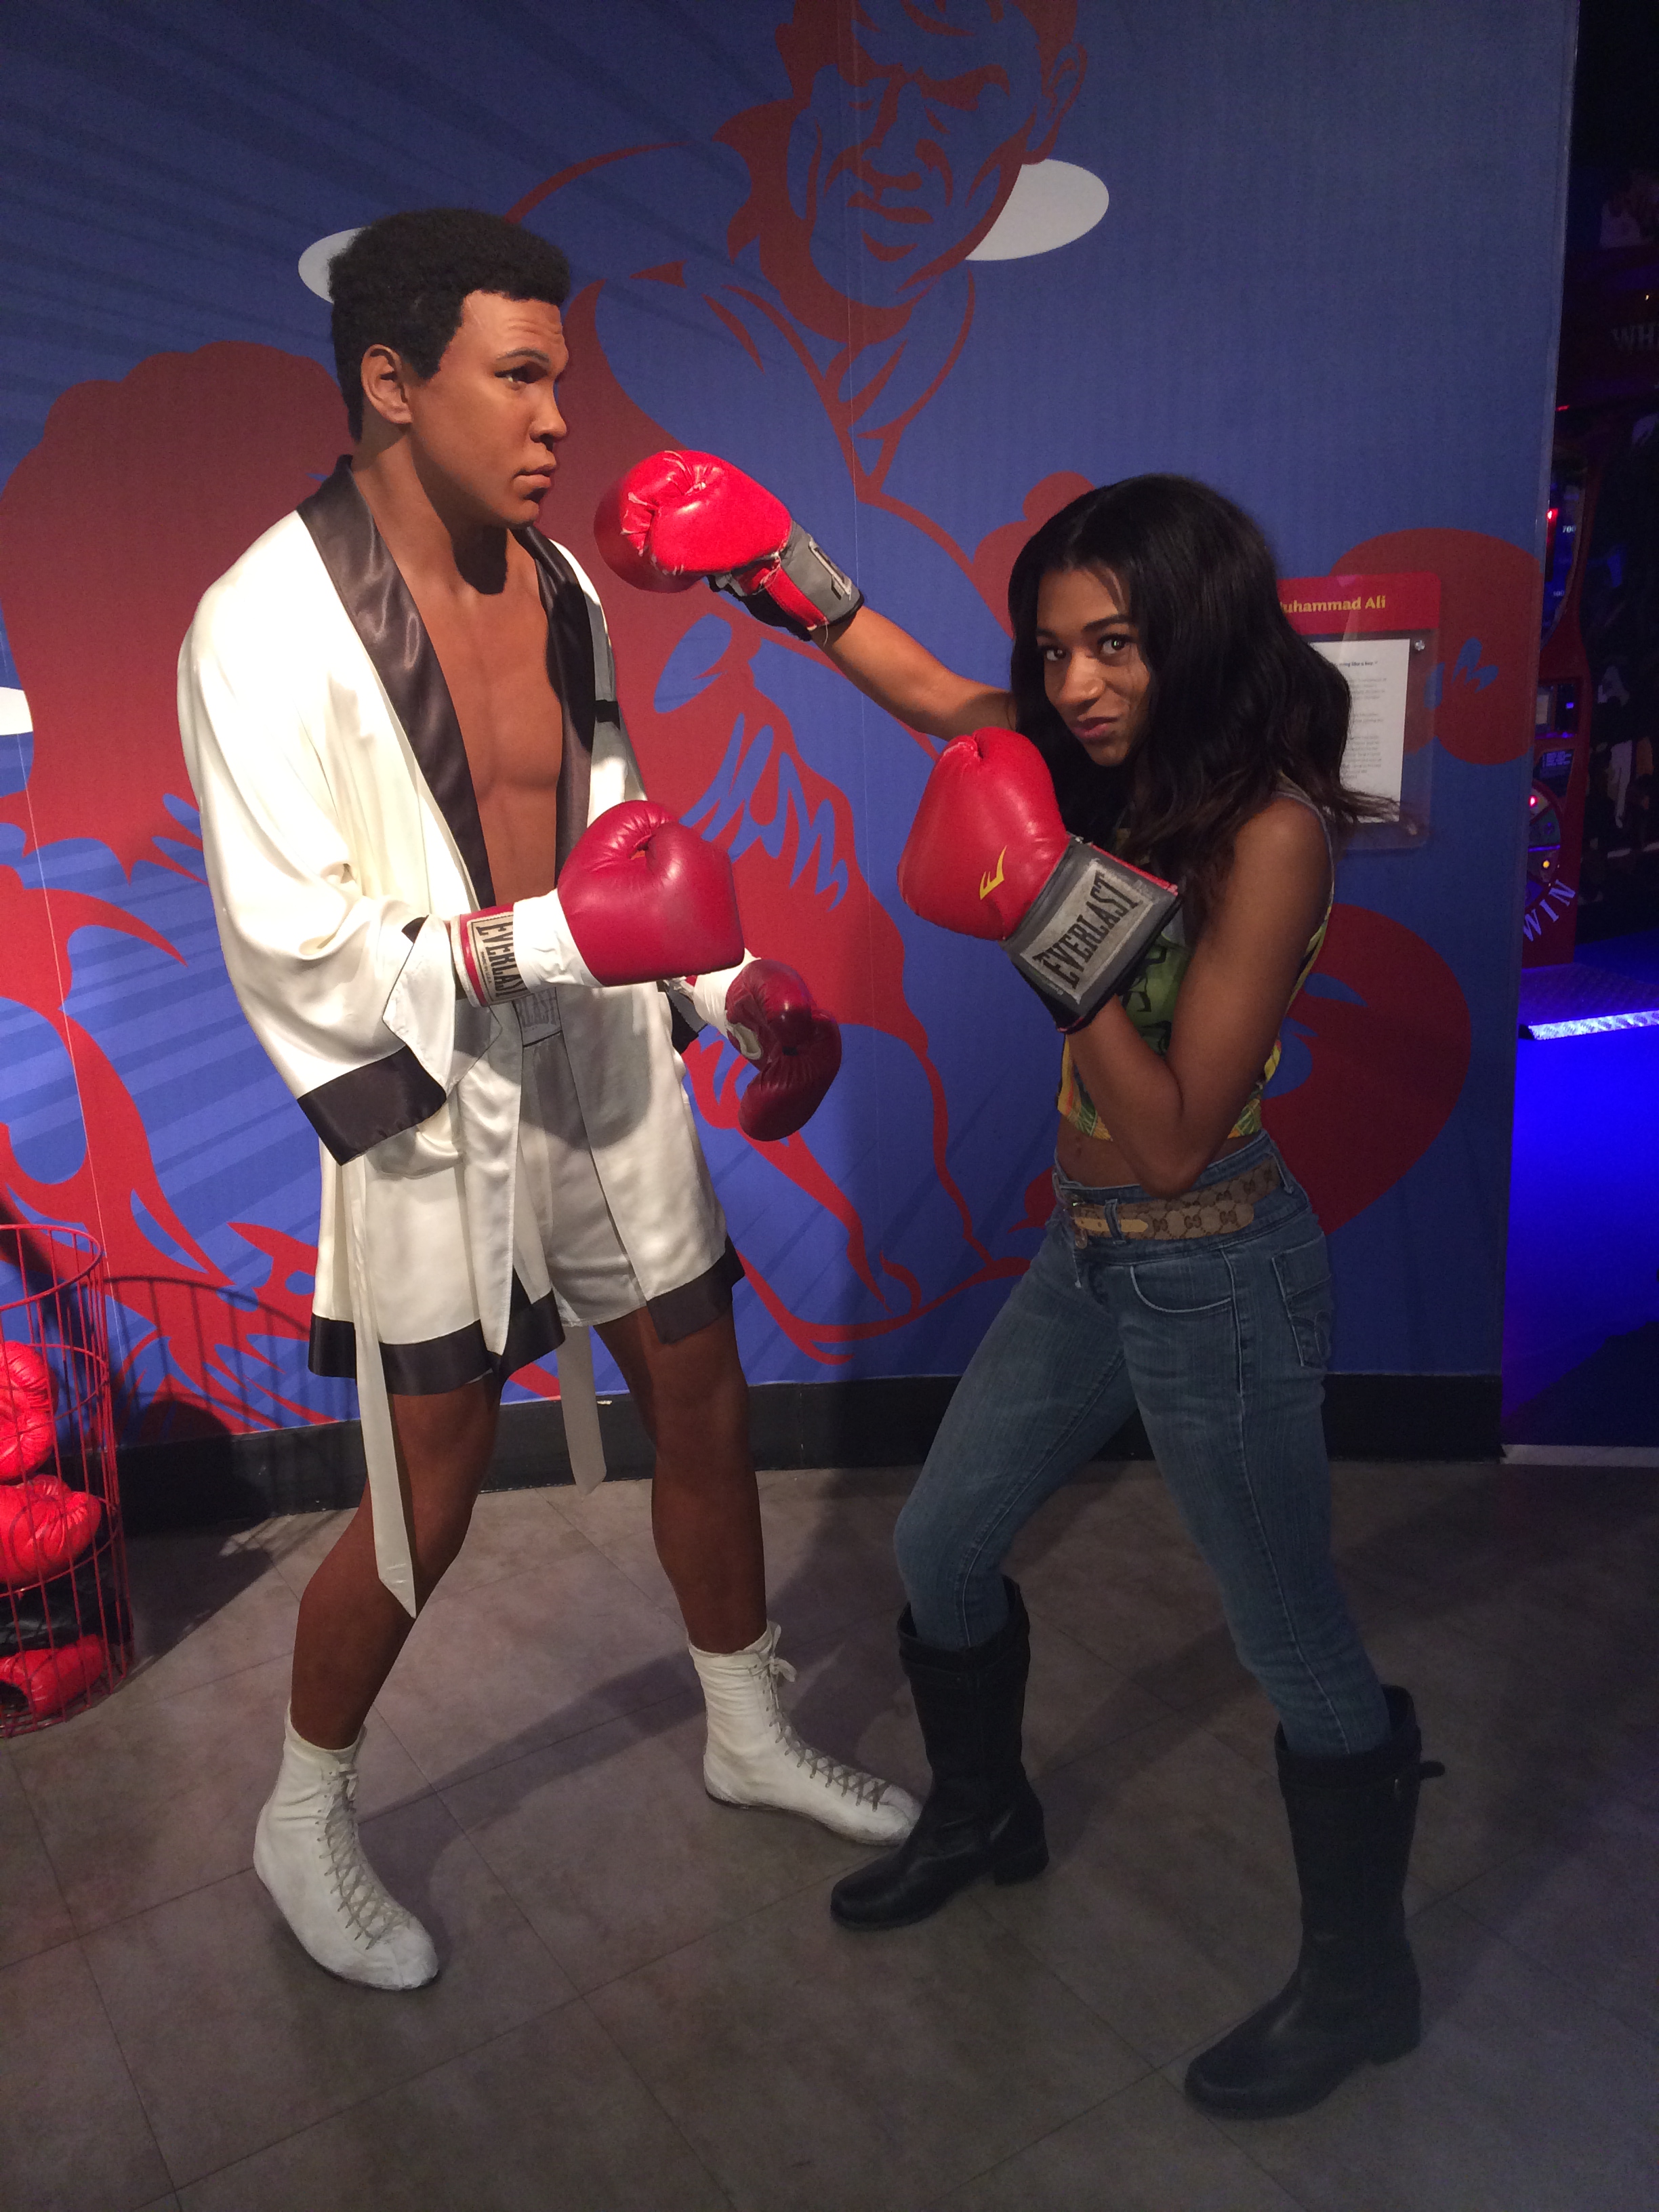 Chelsea takes photo with Ali at Madame Tussauds Las Vegas